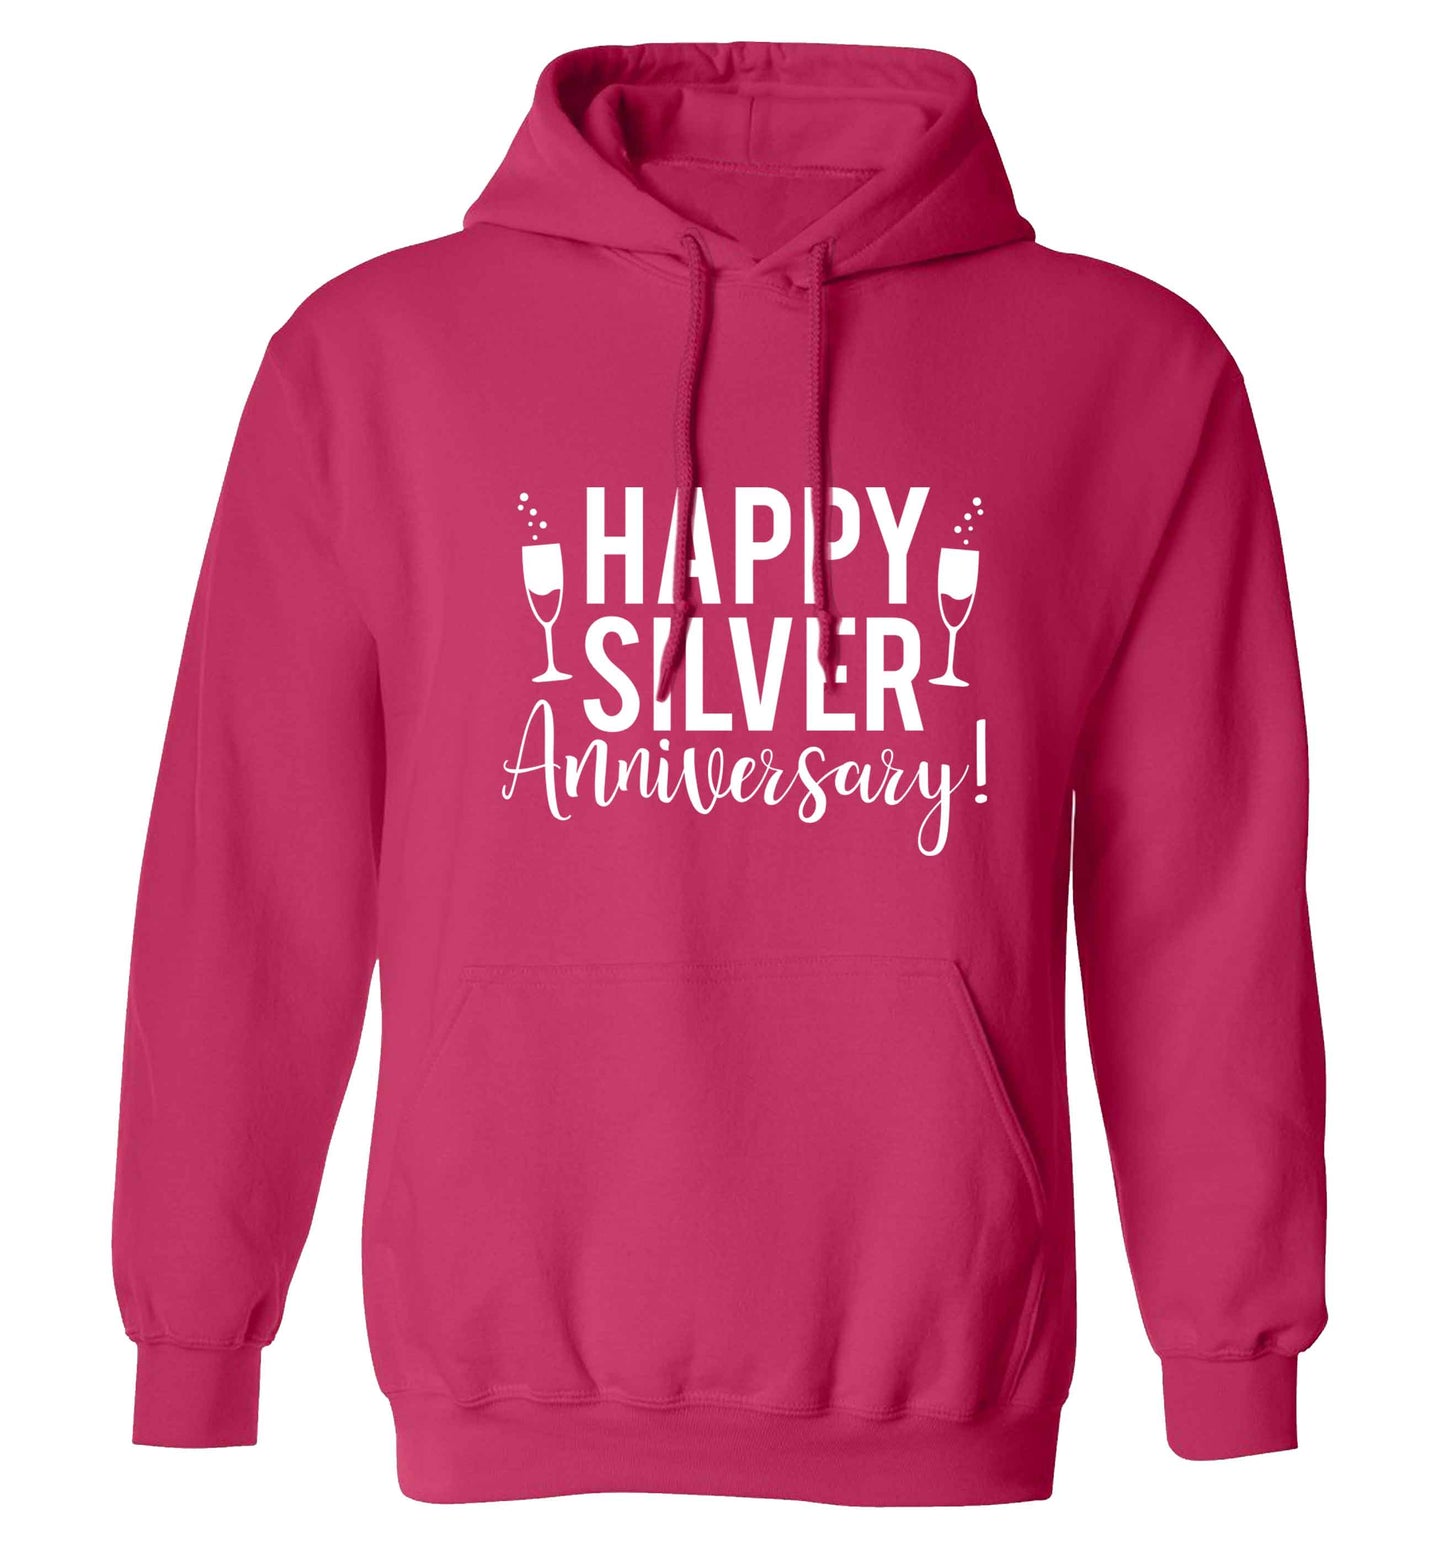 Happy silver anniversary! adults unisex pink hoodie 2XL